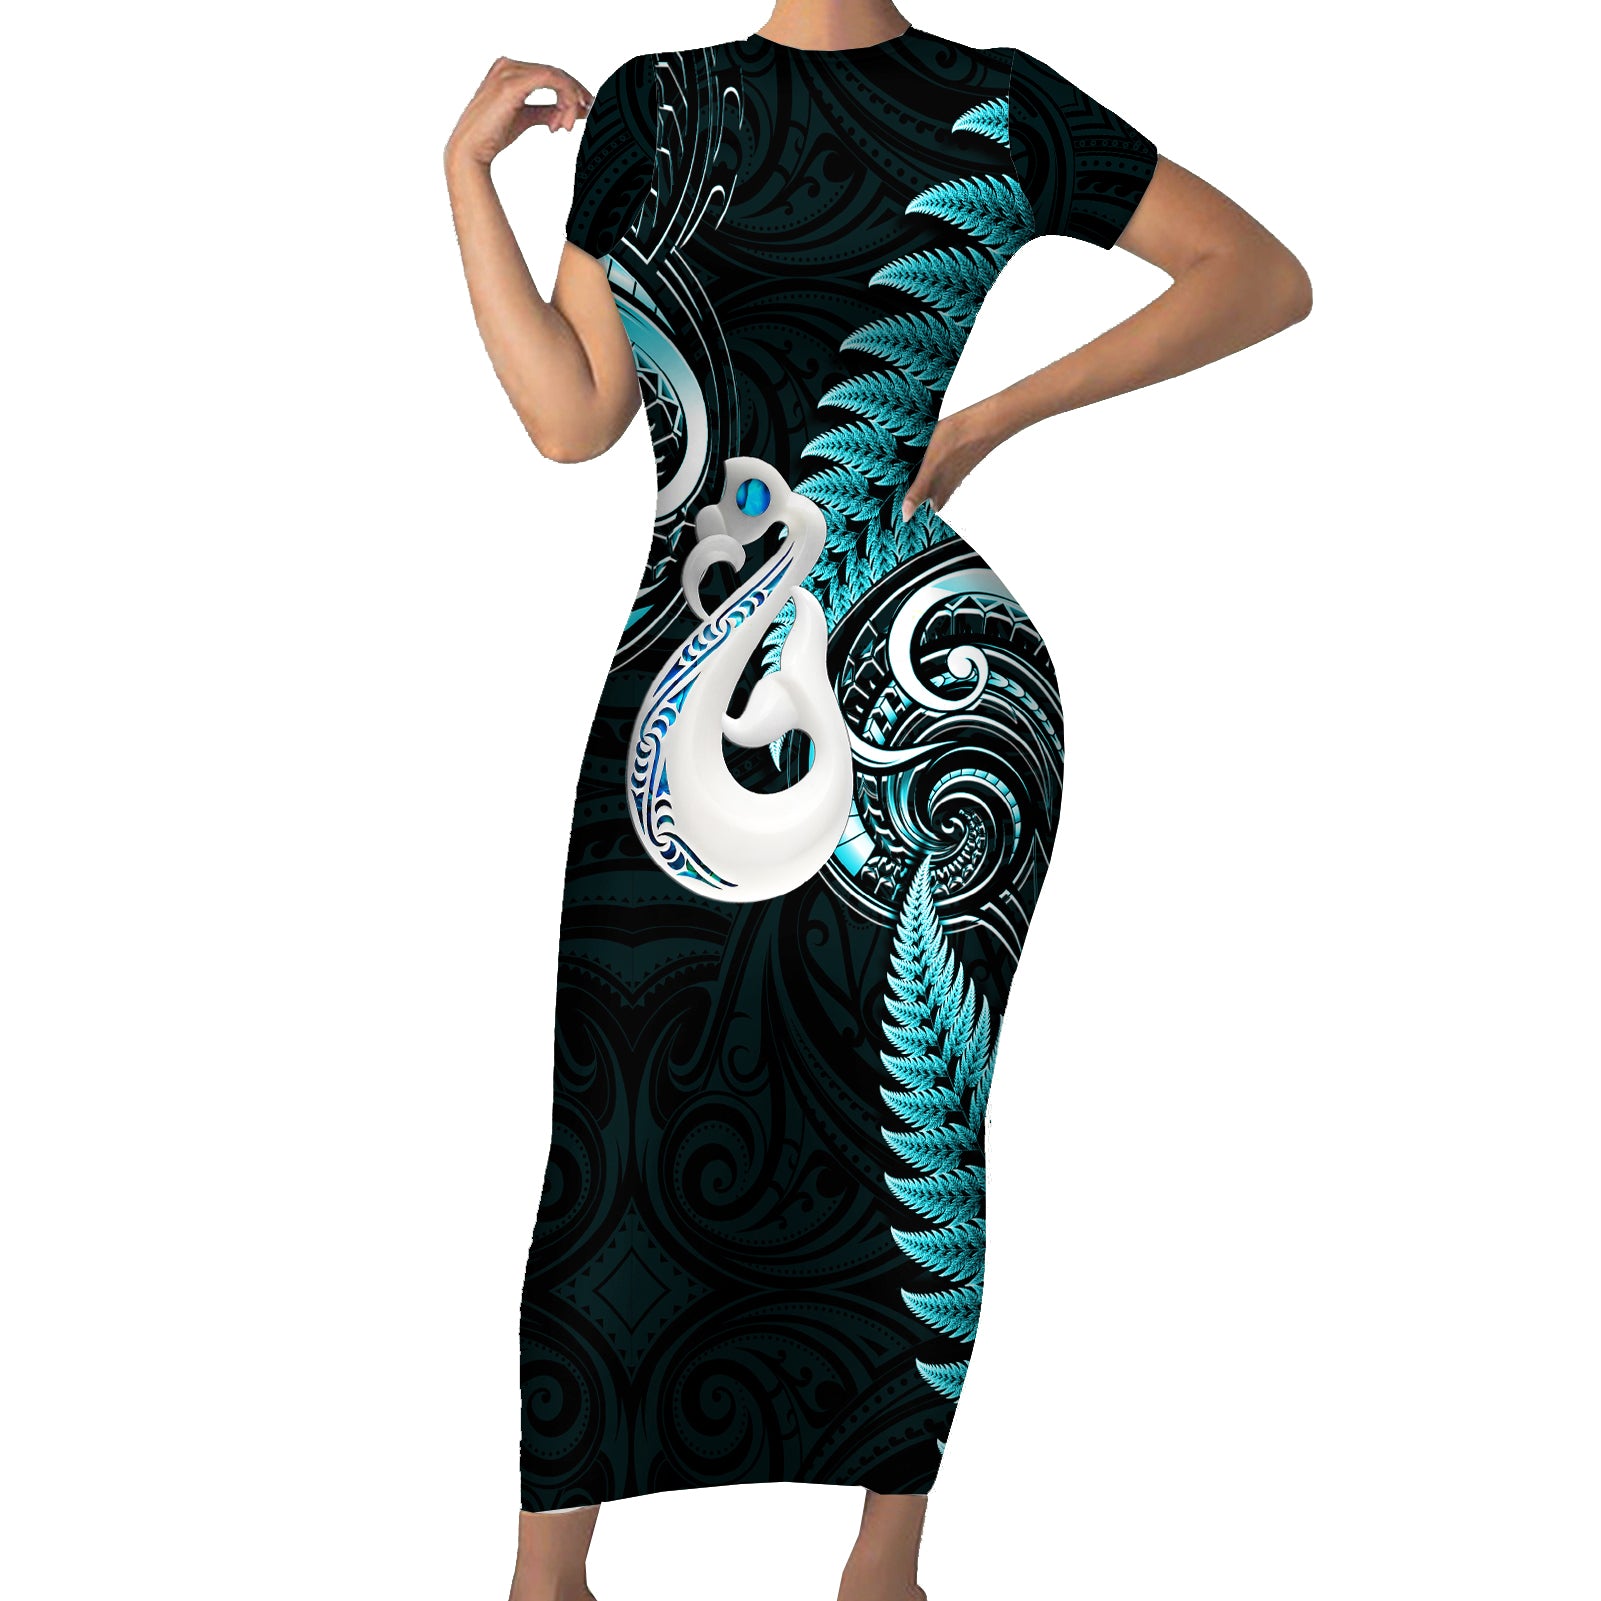 Personalised New Zealand Short Sleeve Bodycon Dress Aotearoa Silver Fern With Manaia Maori Unique Turquoise LT14 Long Dress Turquoise - Polynesian Pride